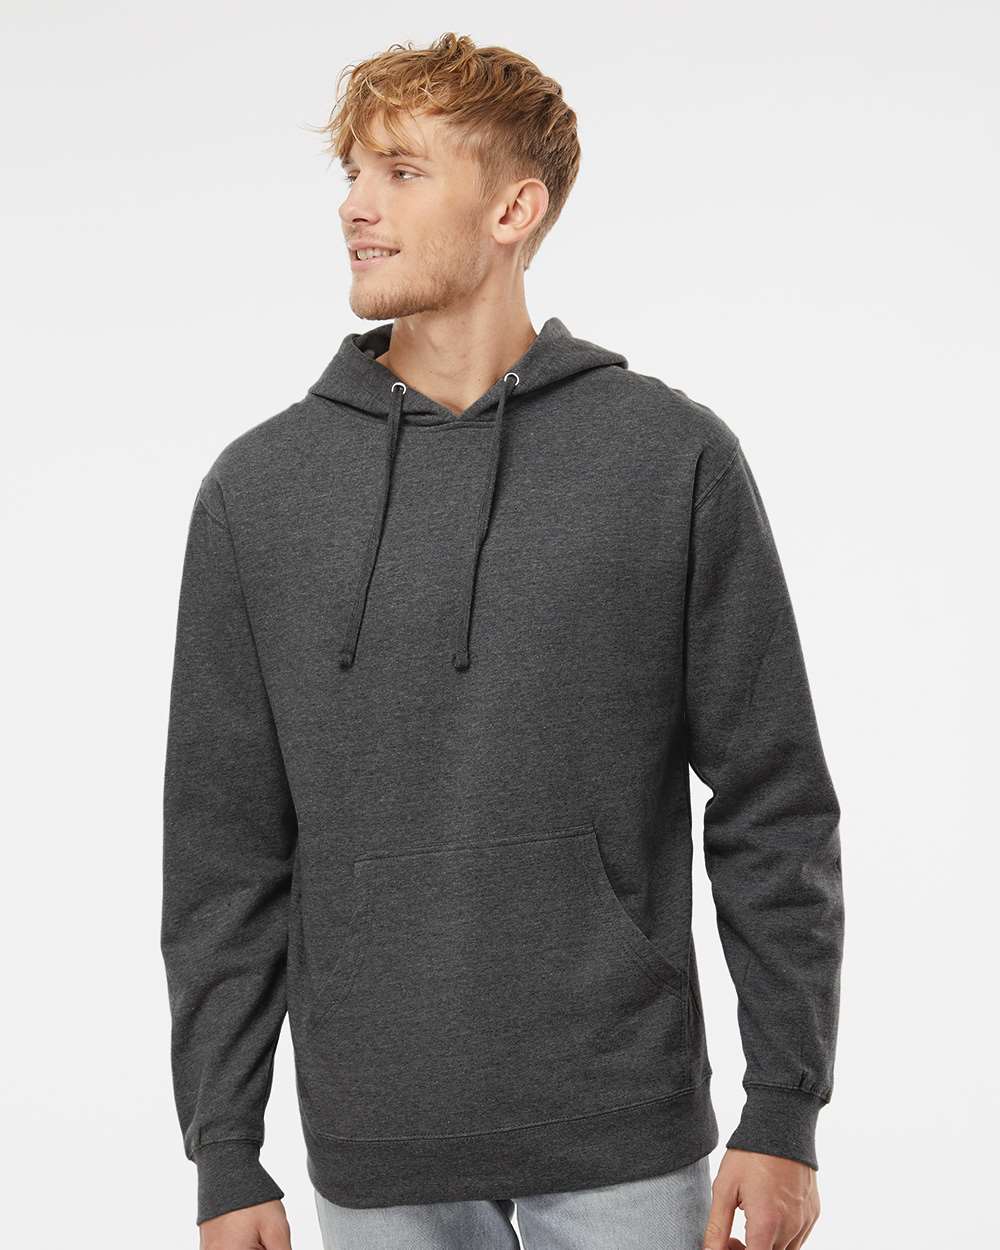 Independent Trading Co. Midweight Hooded Sweatshirt SS4500 #colormdl_Charcoal Heather